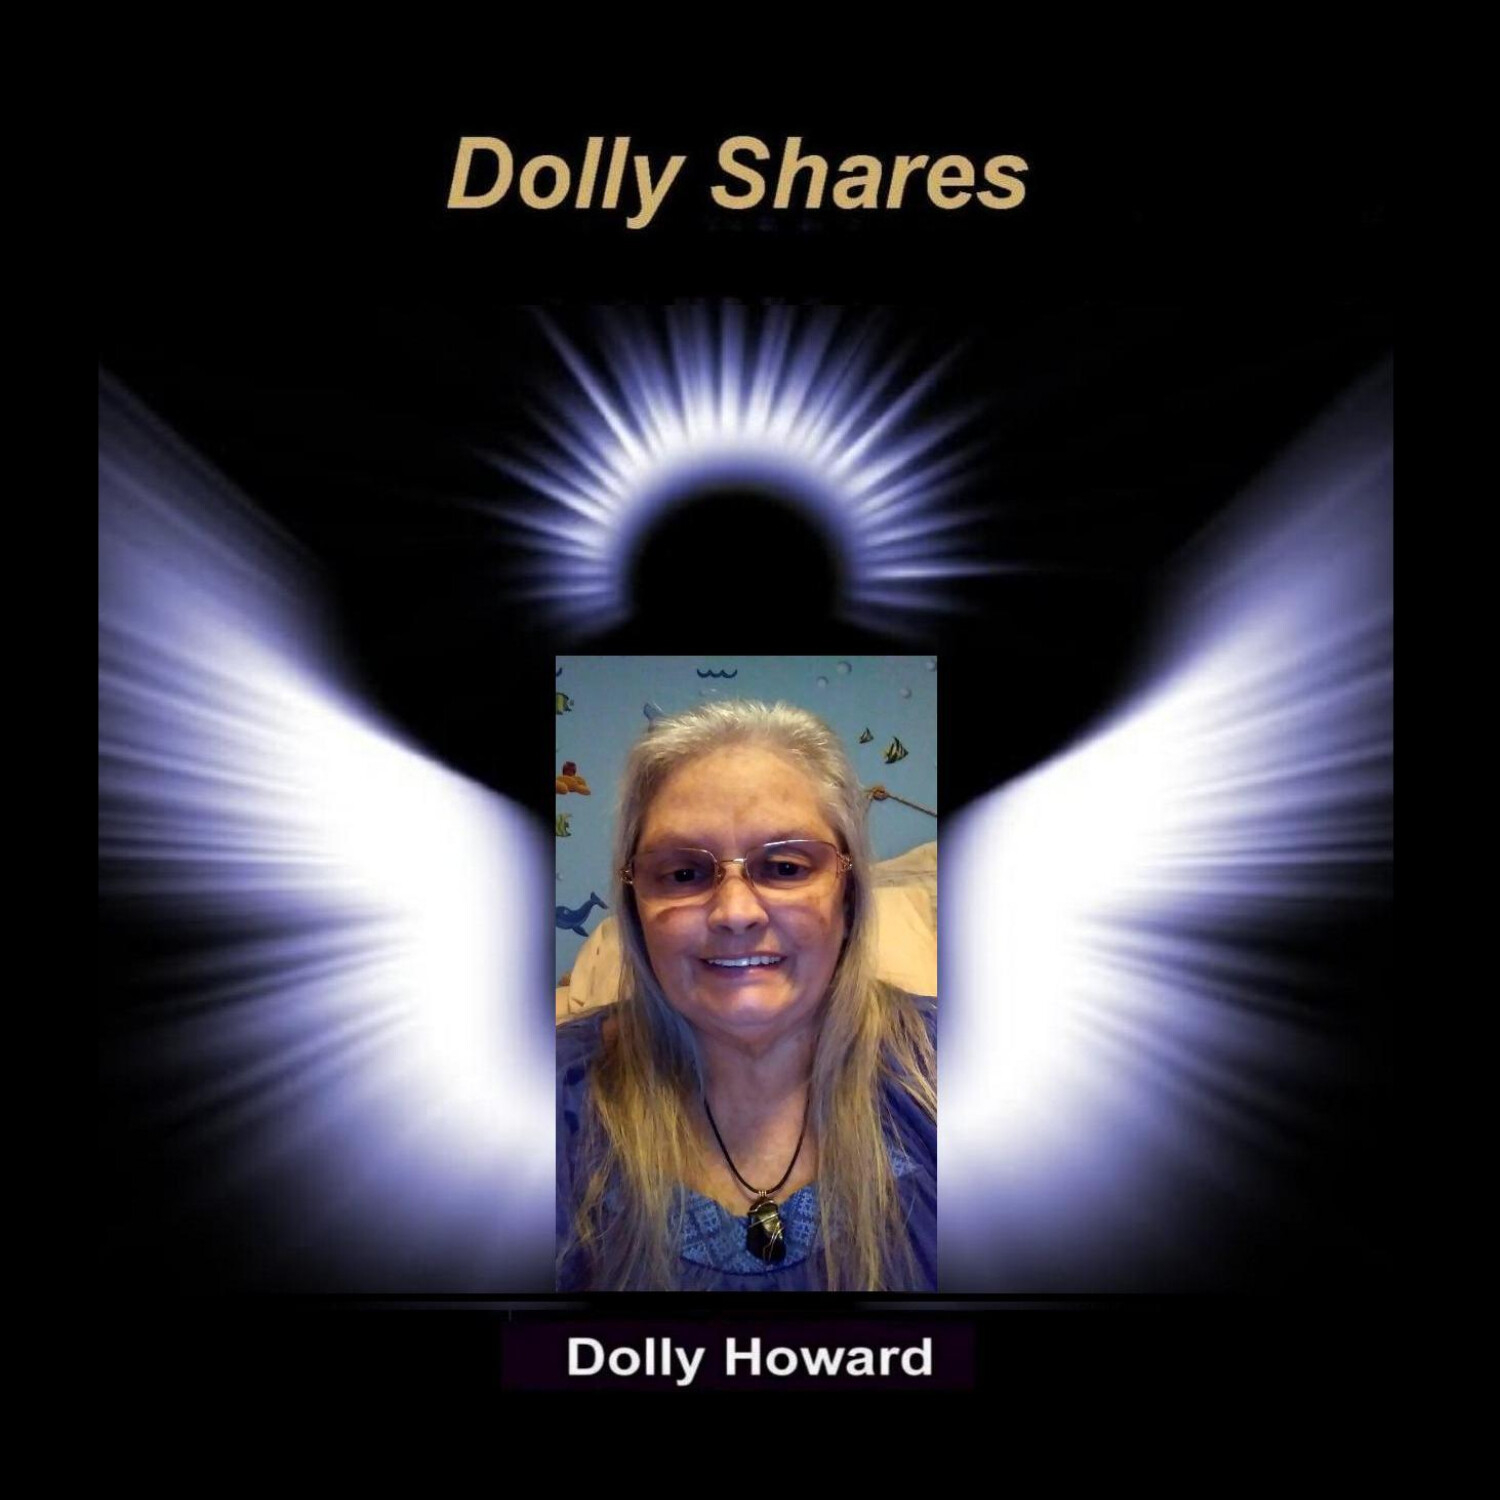 "DOLLY SHARES" 1/30/19 - Defamation of Character